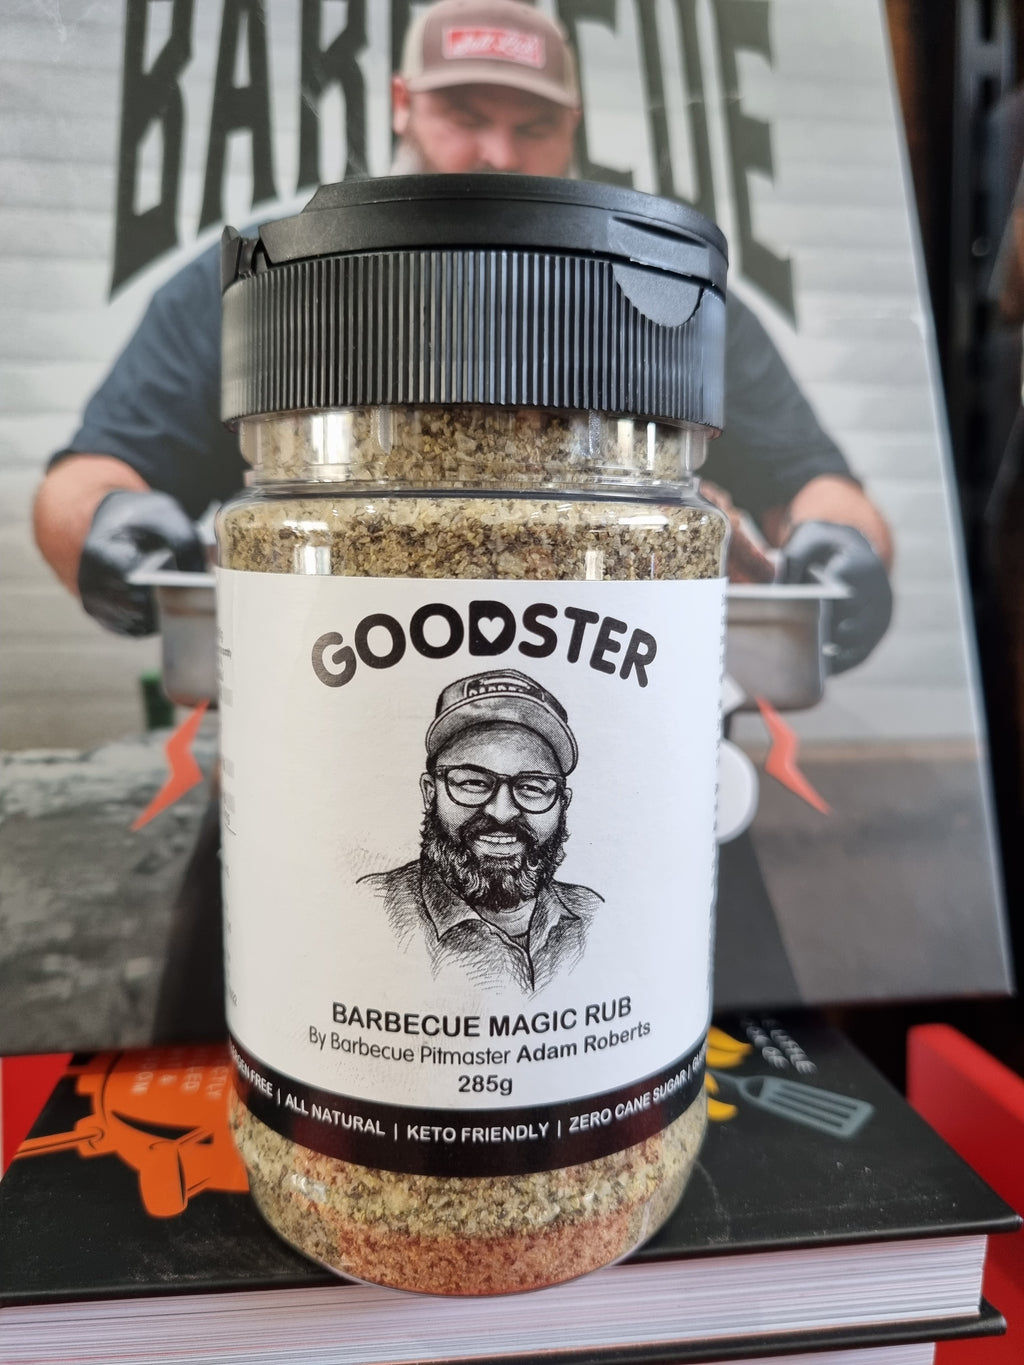 GOODSTER Barbecue Magic Rub by Adam Roberts